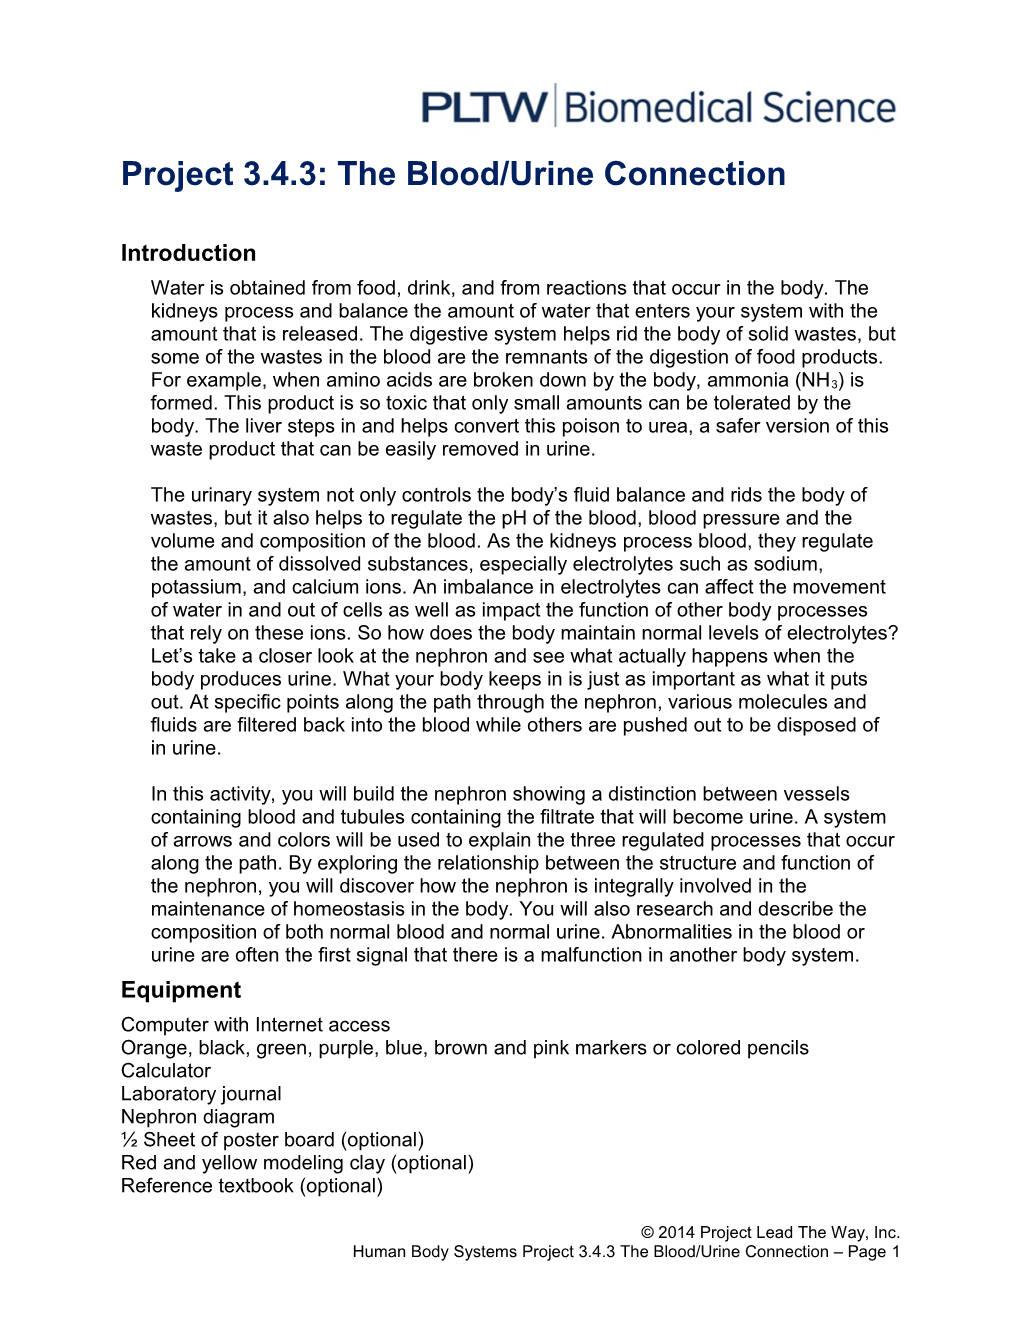 Project 3.4.3: the Blood/Urine Connection